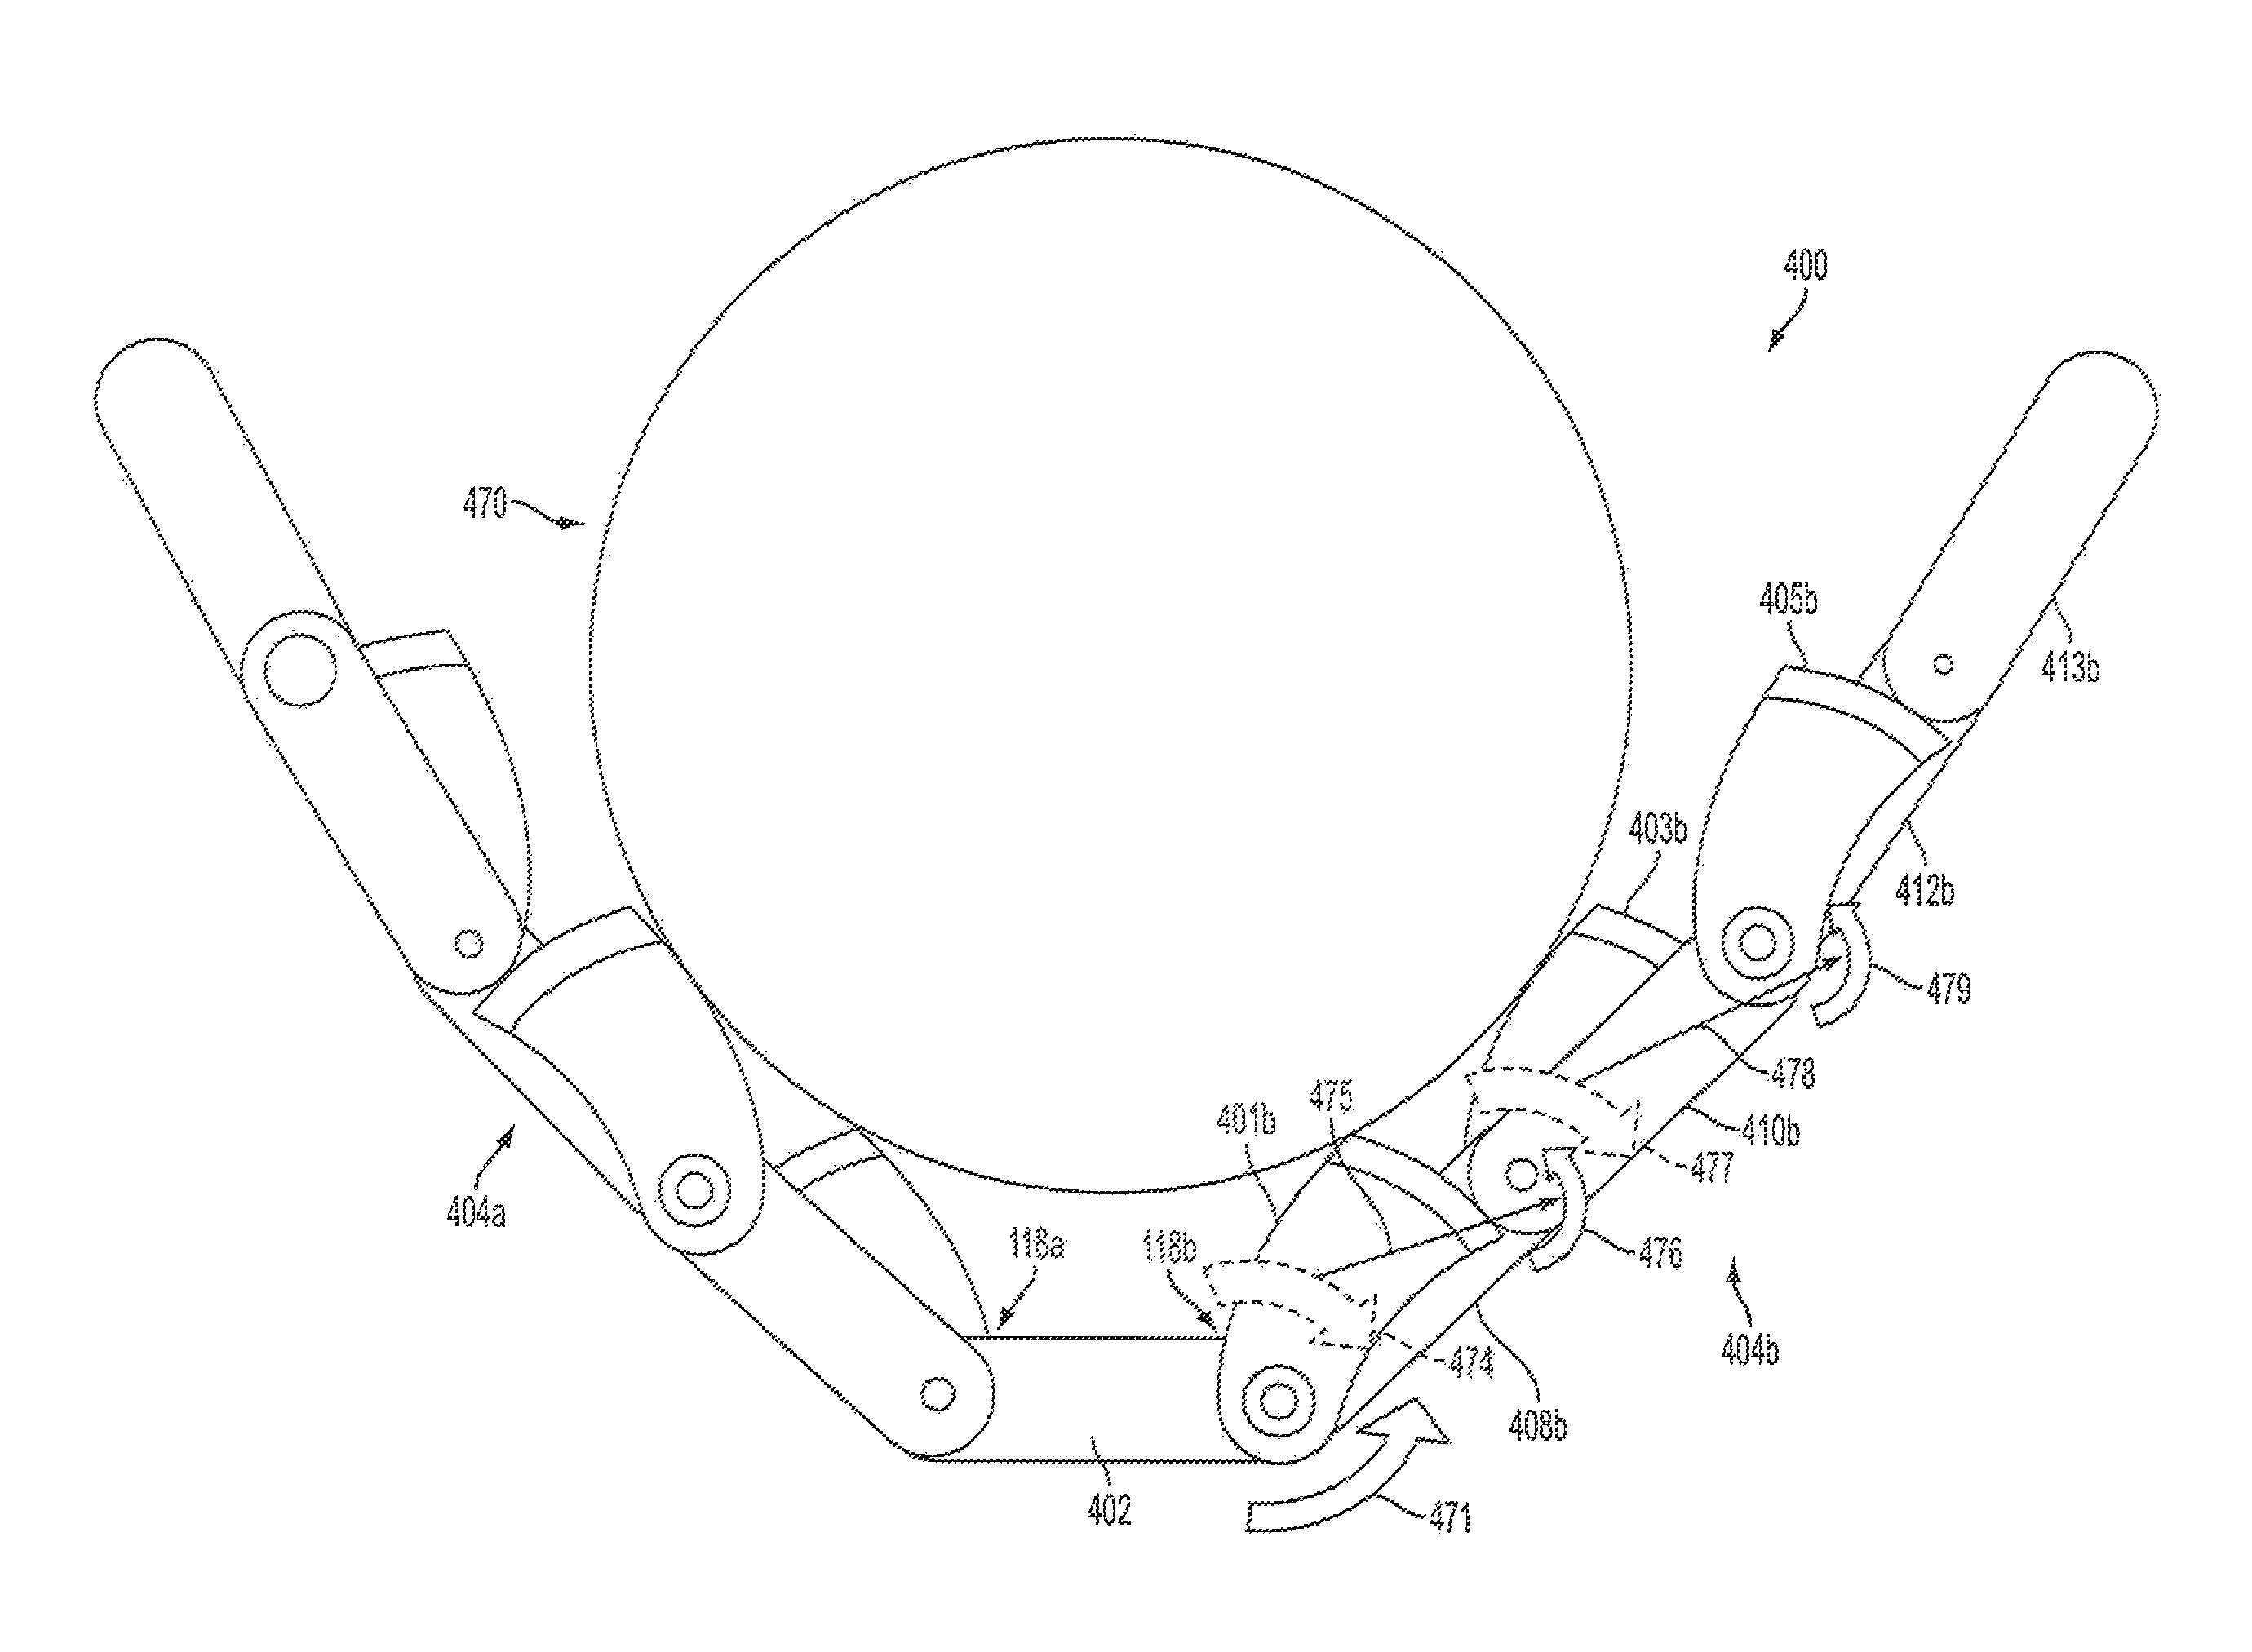 Interconnected phalanges for robotic gripping